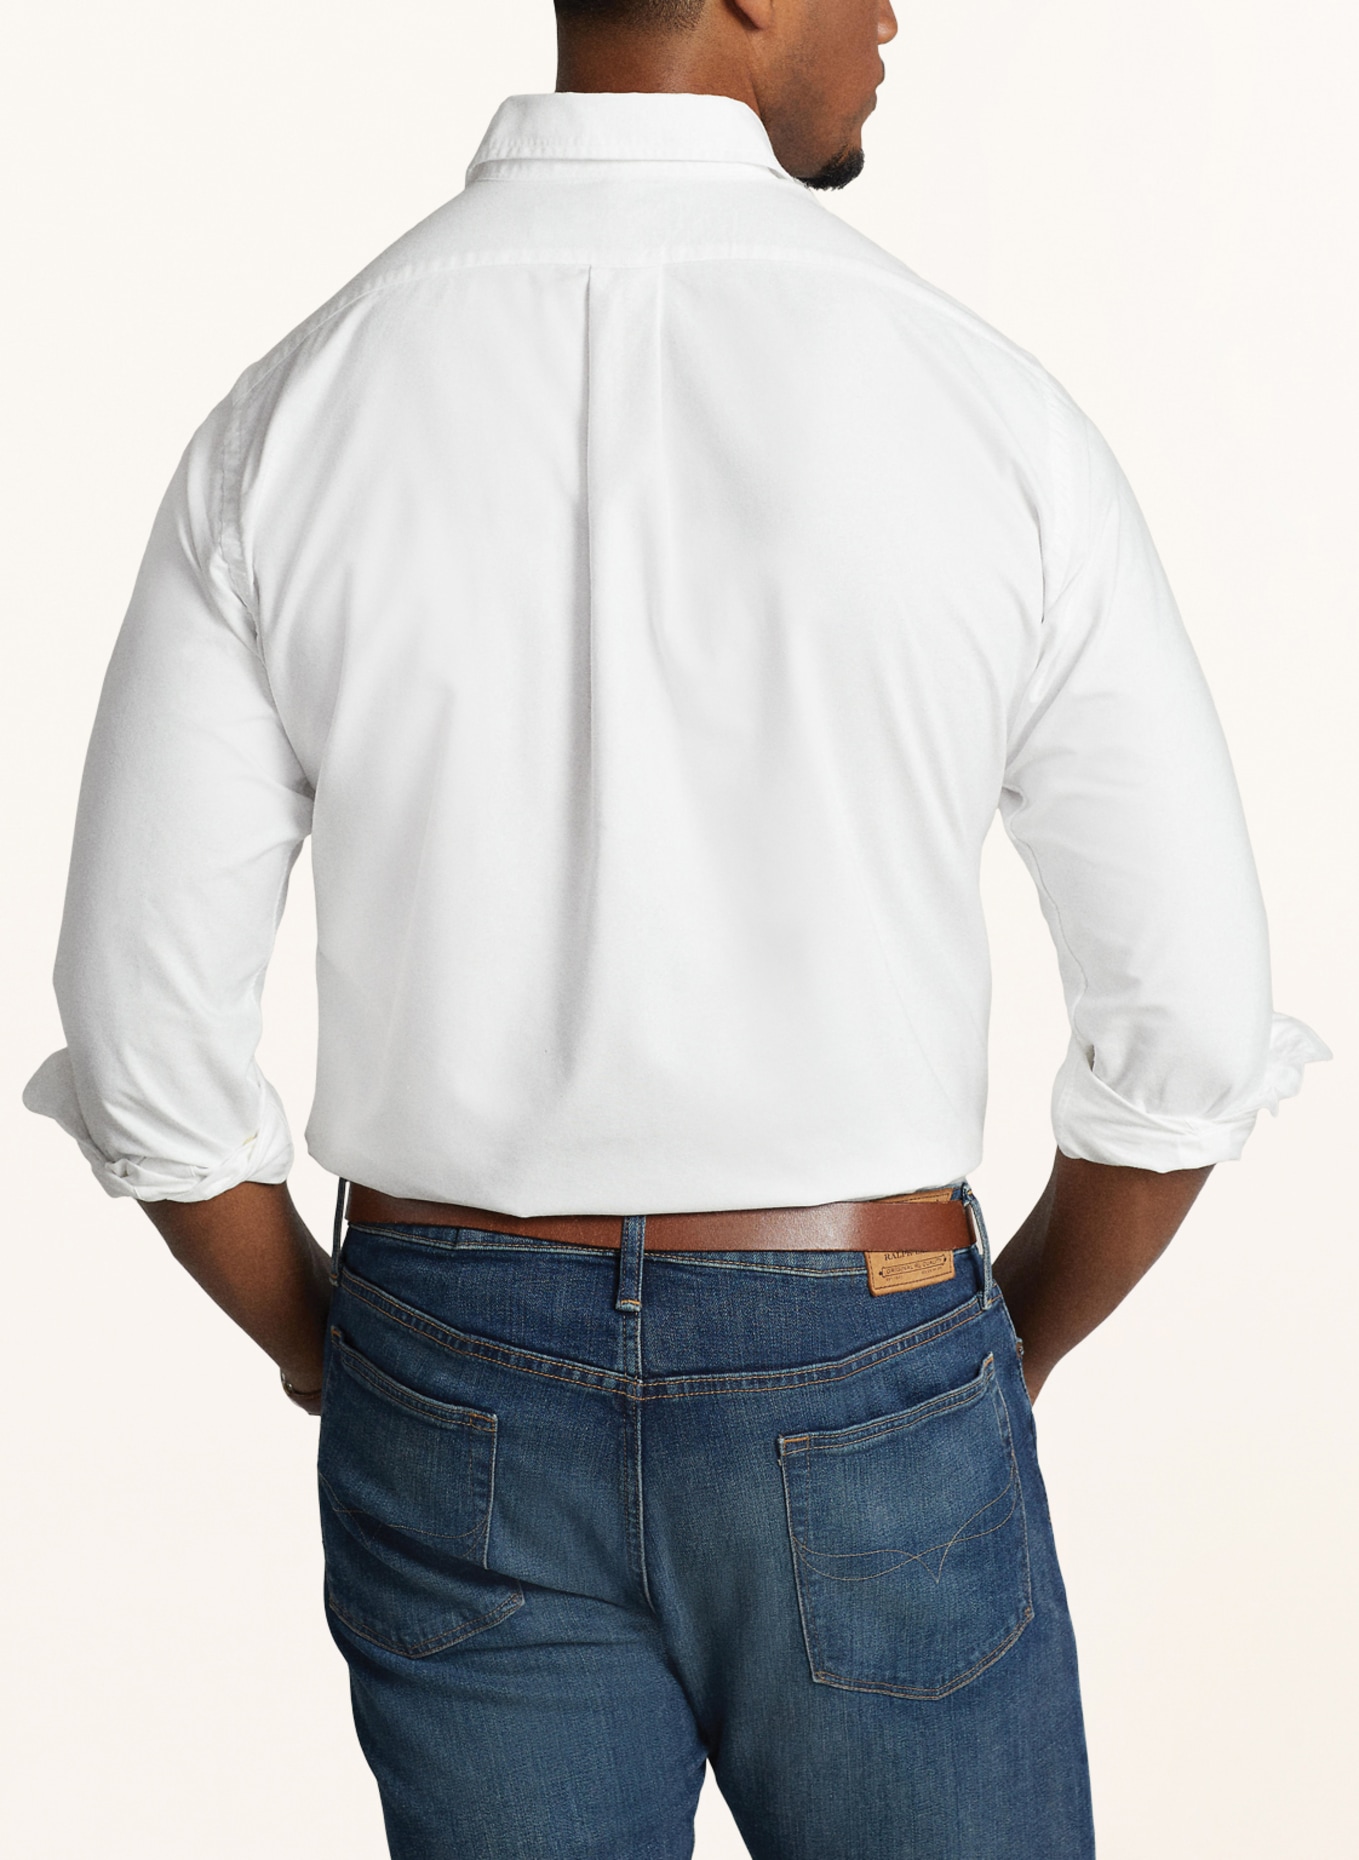 POLO RALPH LAUREN Big & Tall Oxford shirt core fit, Color: WHITE (Image 3)